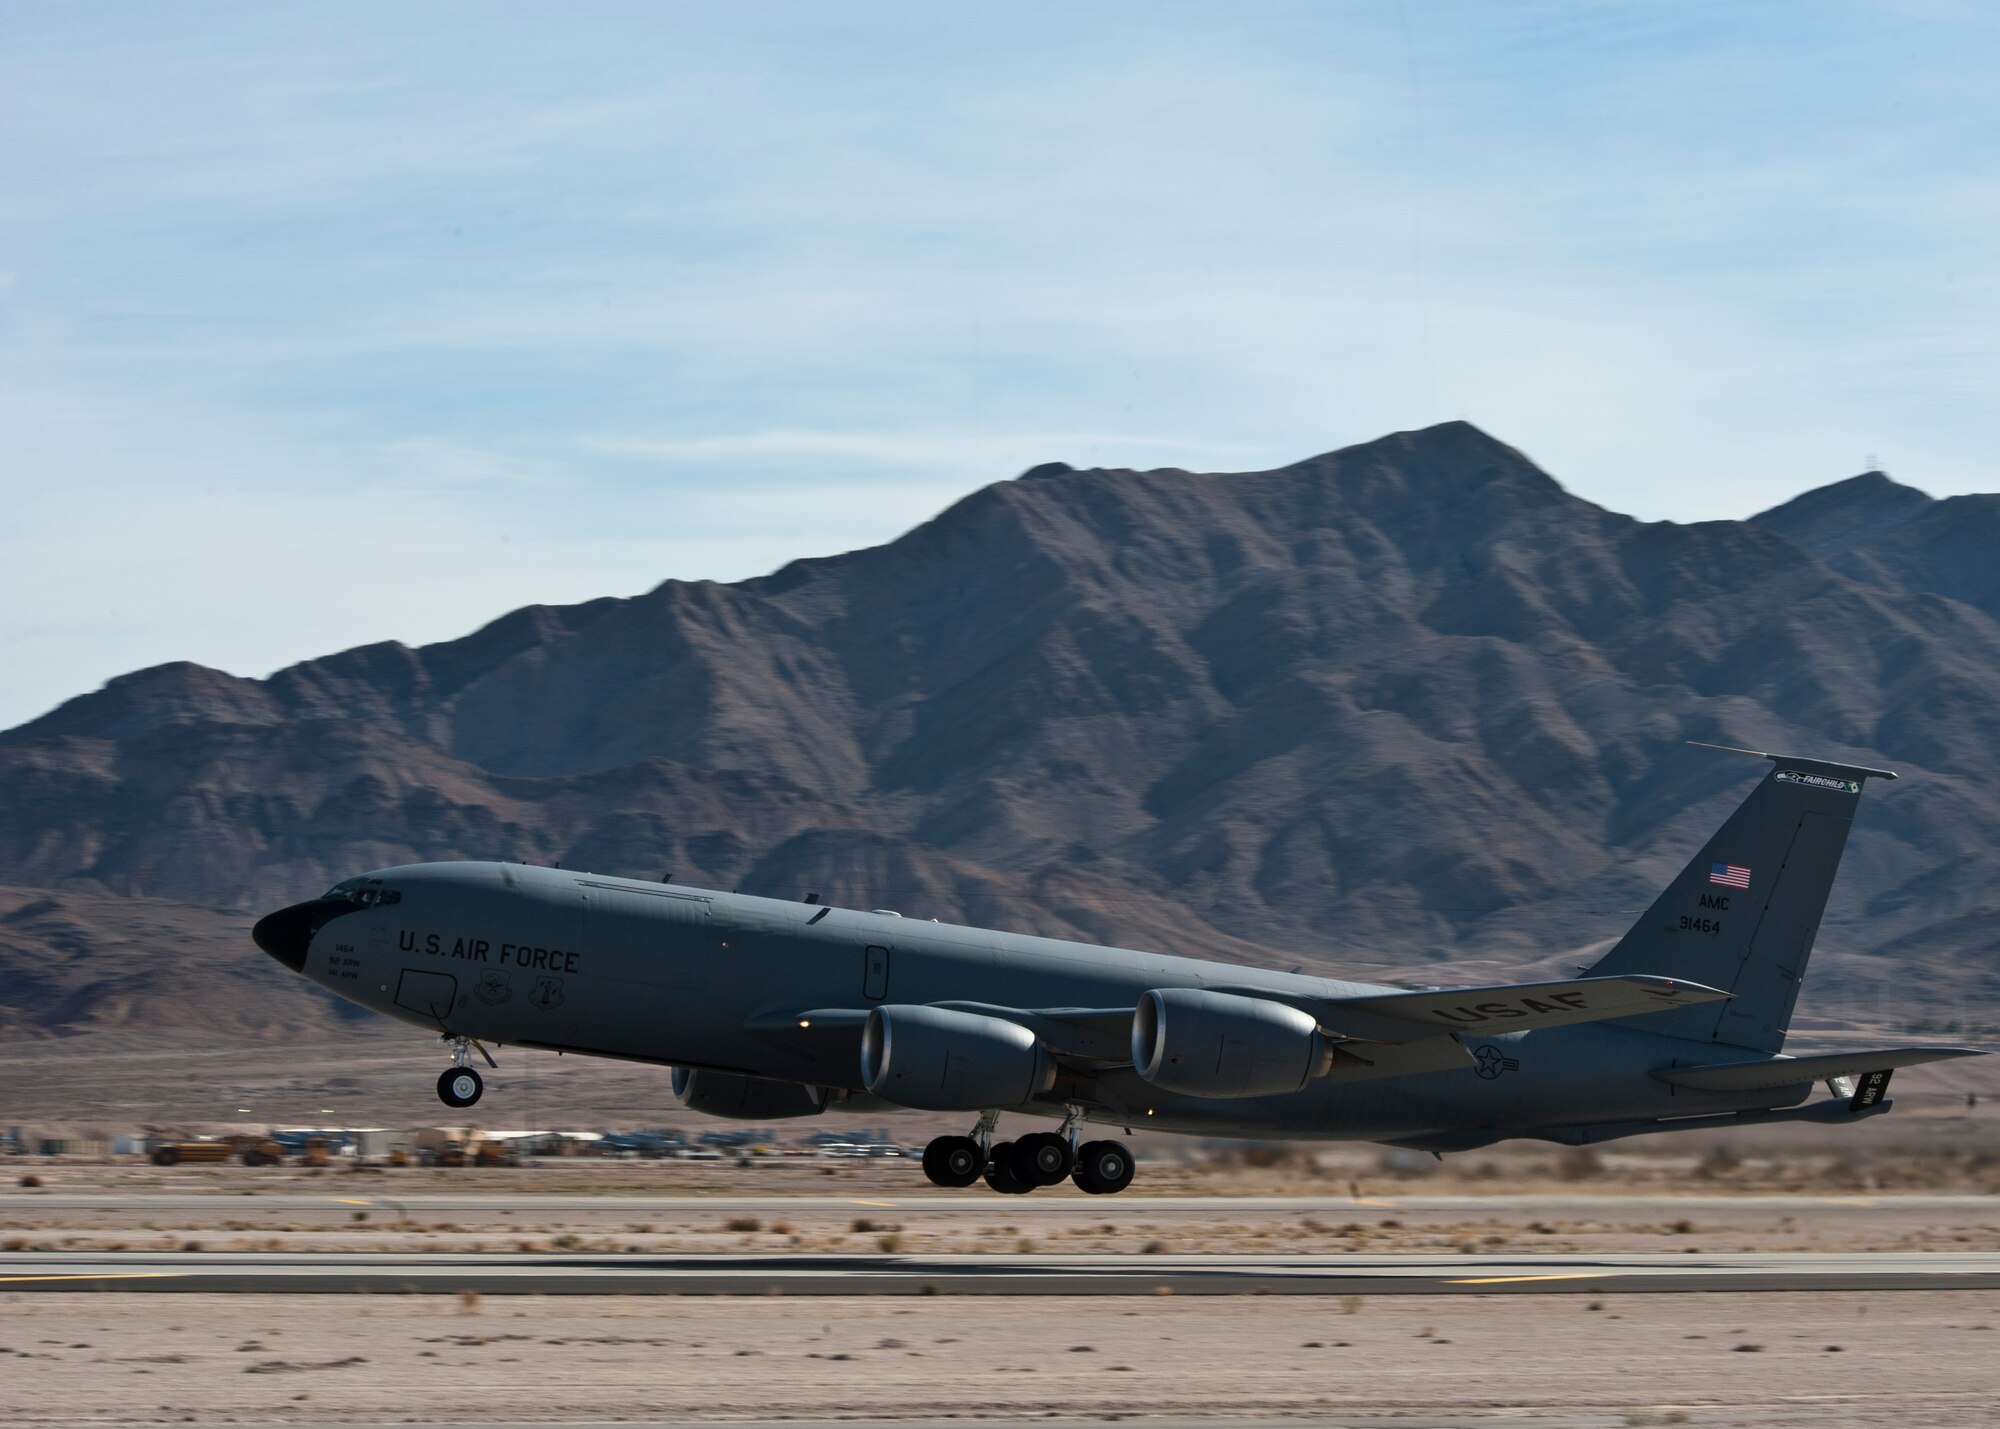 A KC-135 Stratotanker assigned to the 92nd Air Refueling Wing at Fairchild Air Force Base, Wash., takes off during Red Flag 14-1 Jan. 28, 2014, at Nellis Air Force Base, Nev. Red Flag is hosted by the 414th Combat Training Squadron. In a typical Red Flag exercise, friendly blue forces engage hostile red forces in realistic combat situations in air, space and cyberspace. (U.S. Air Force photo by Airman 1st Class Jason Couillard)